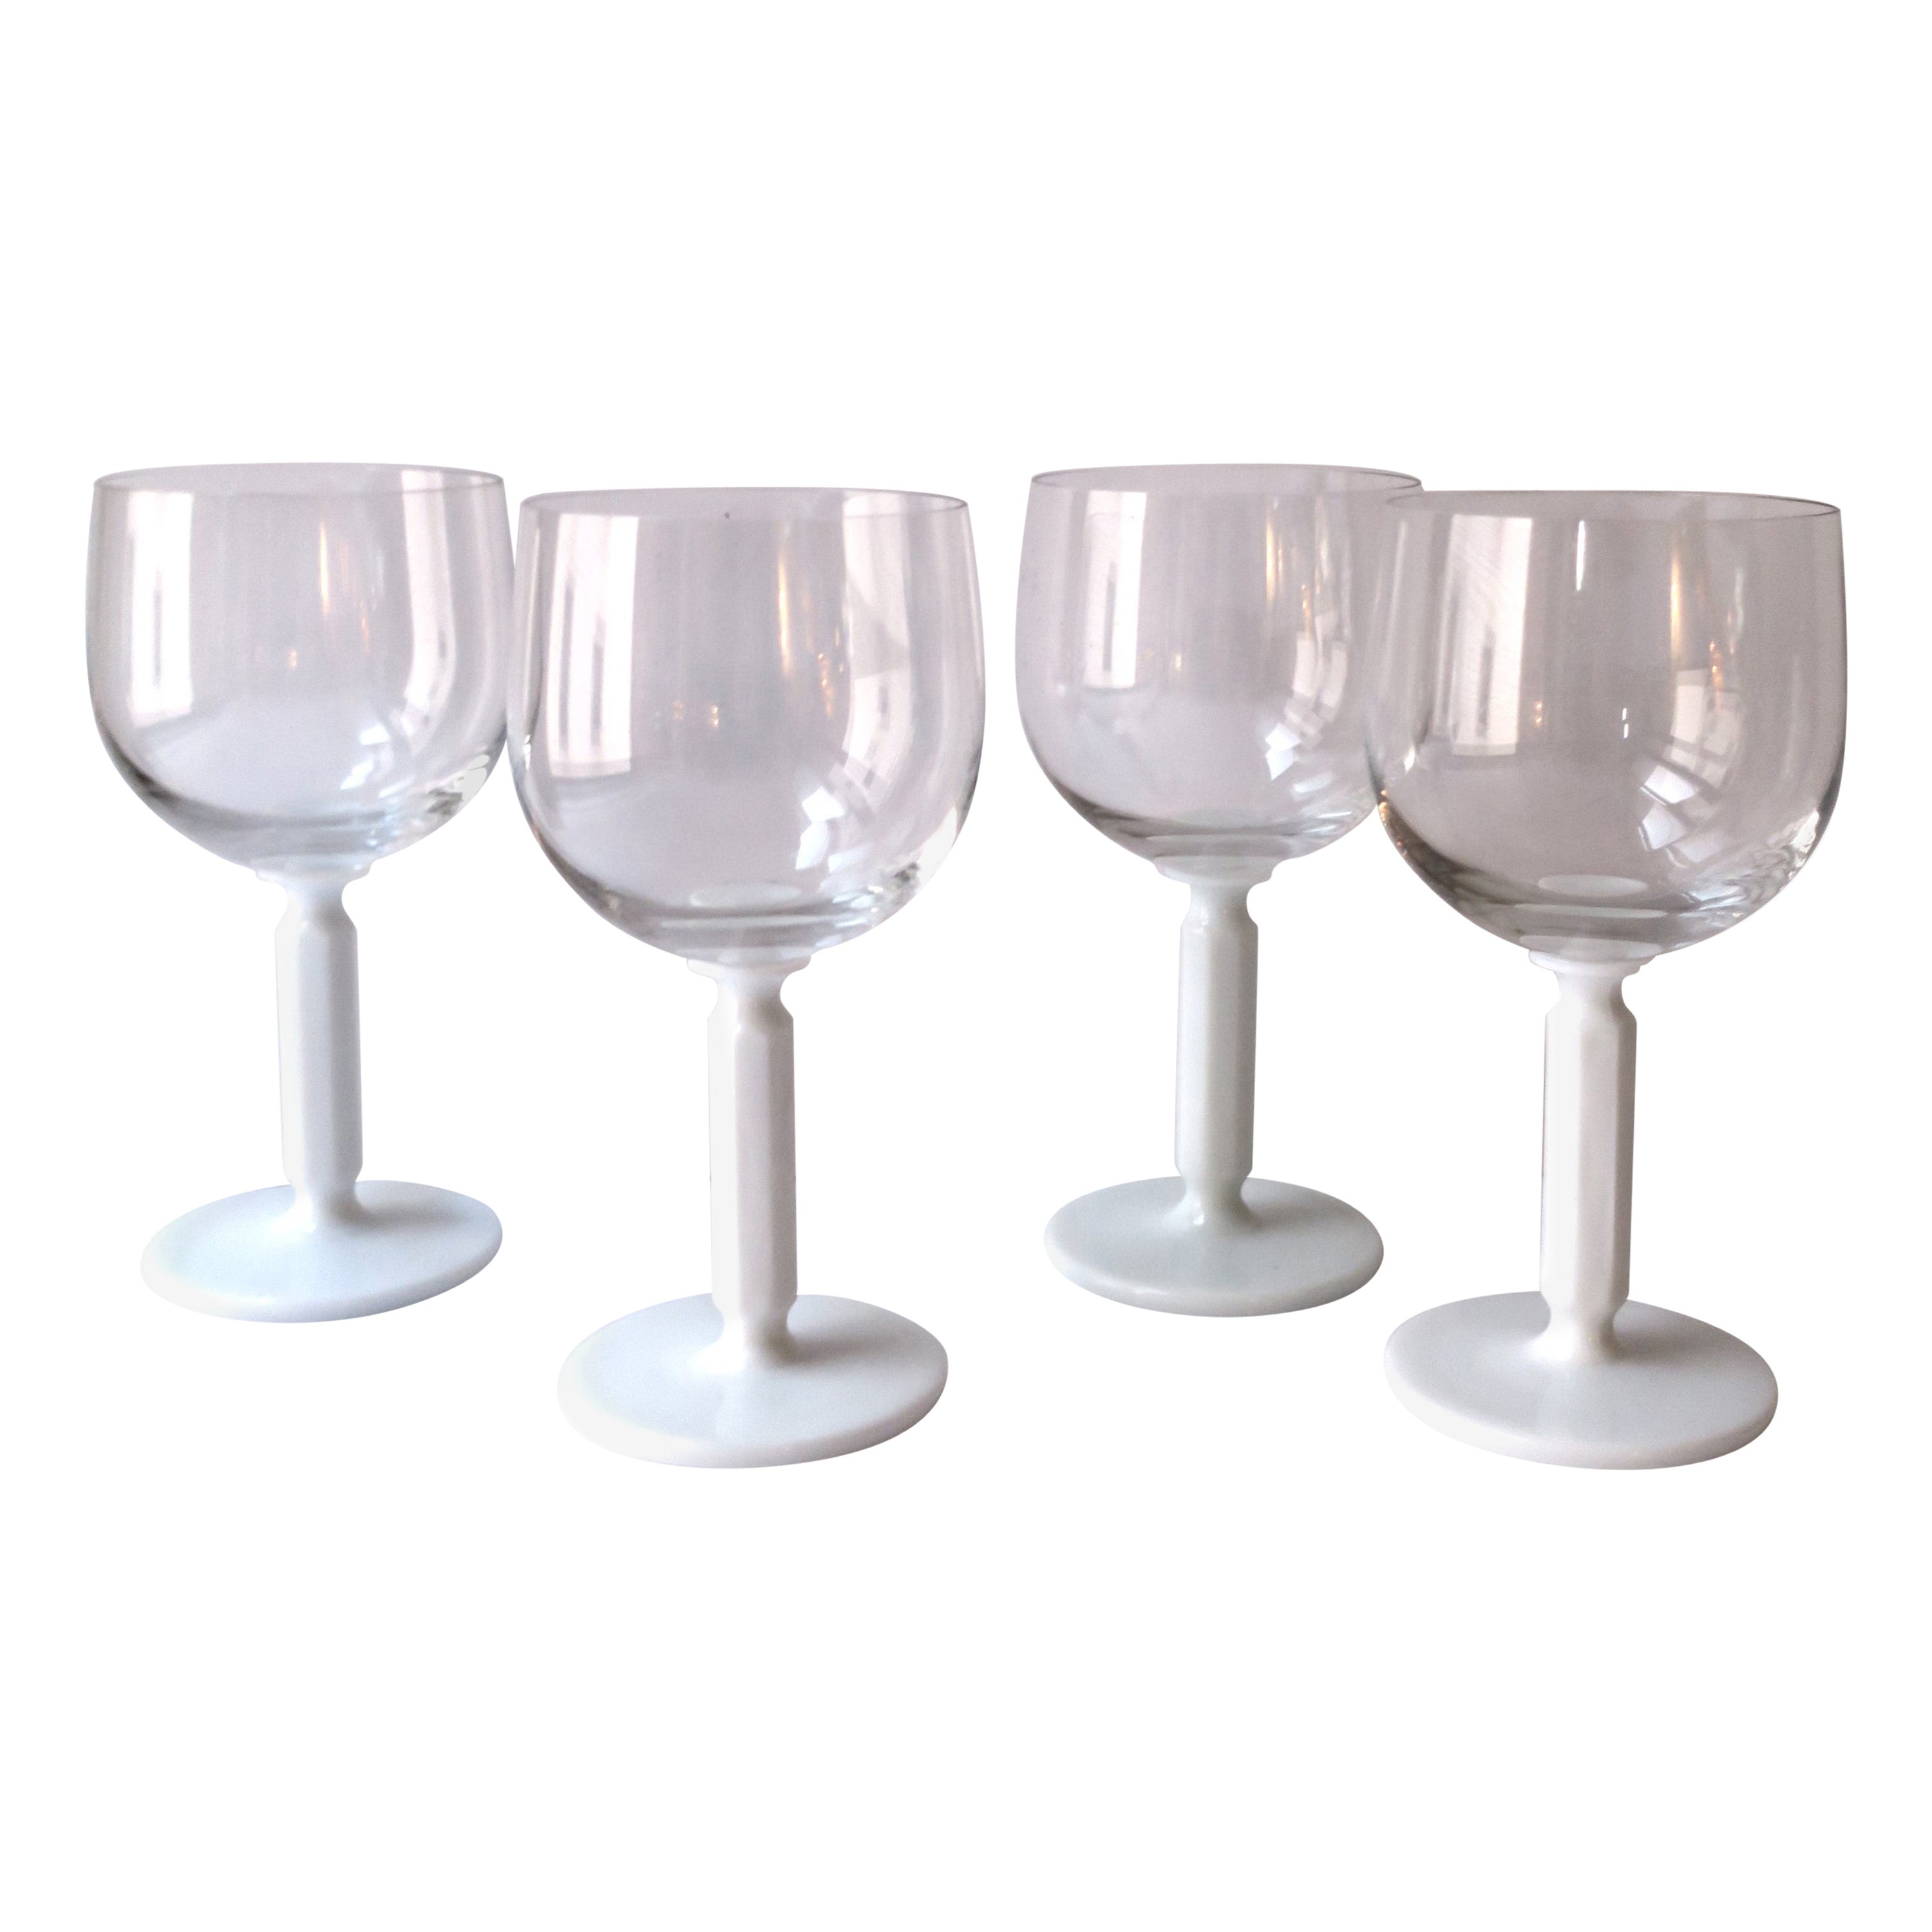 Rosenthal Studio-Line Wine or Cocktail Glasses with White Glass Stem, Set of 4